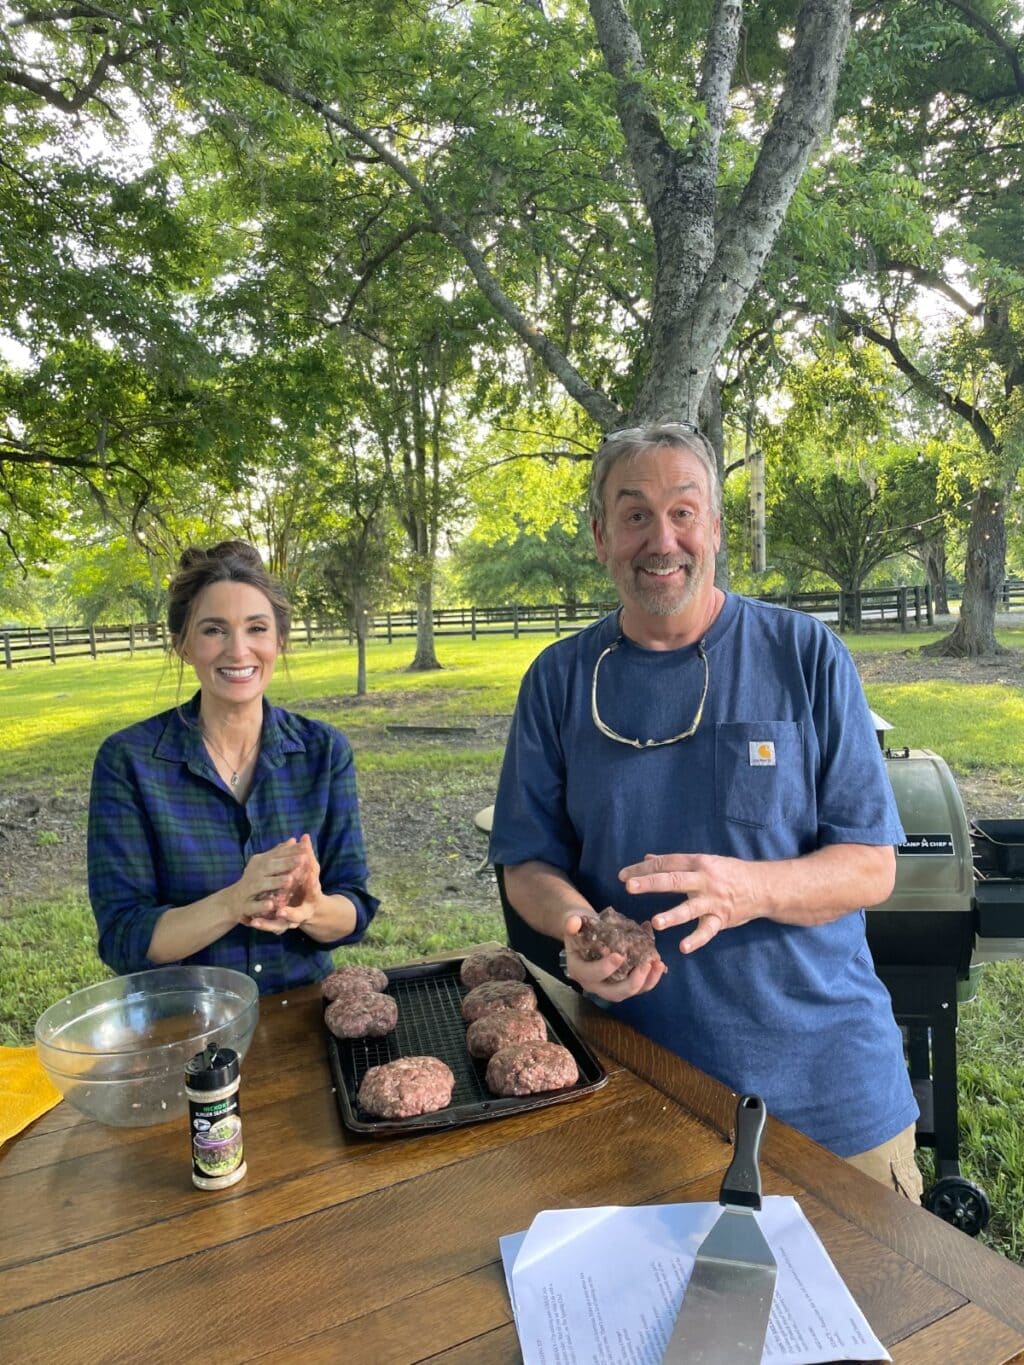 Stacy Lyn and Scott Leysath making venison burger patties outdoors on flat grill